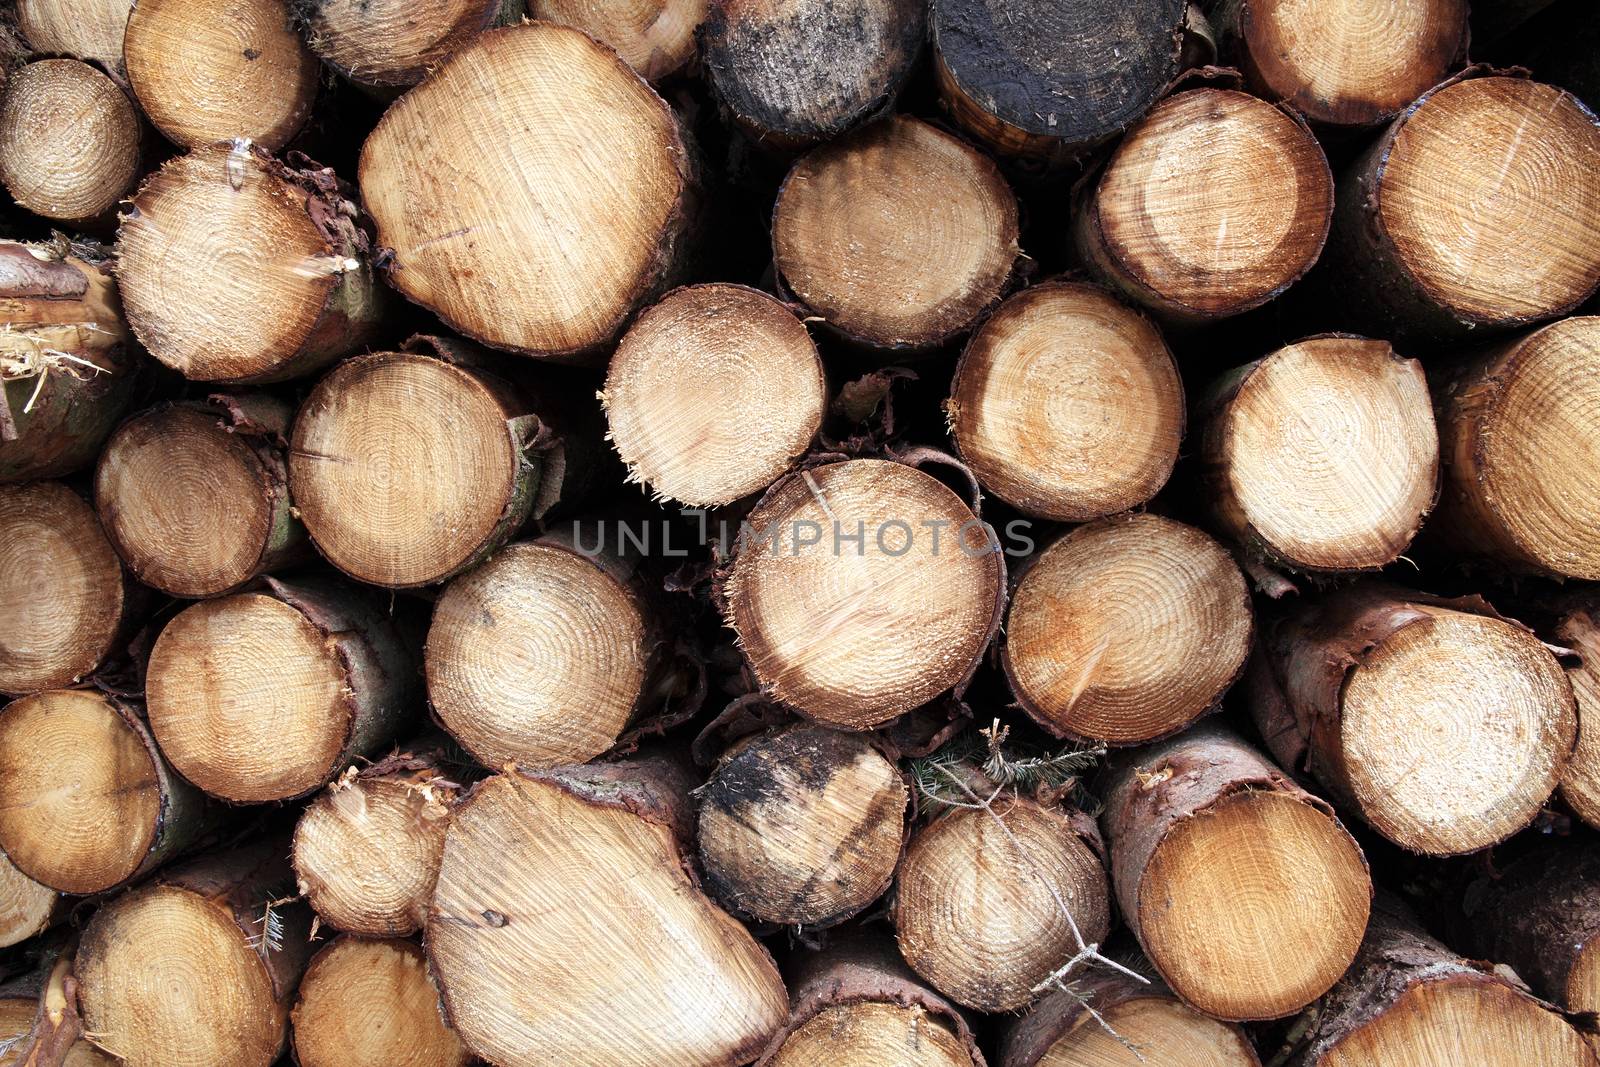 Forest pine trees logs background felled by the logging timber industry which may have an environment conservation impact stock photo